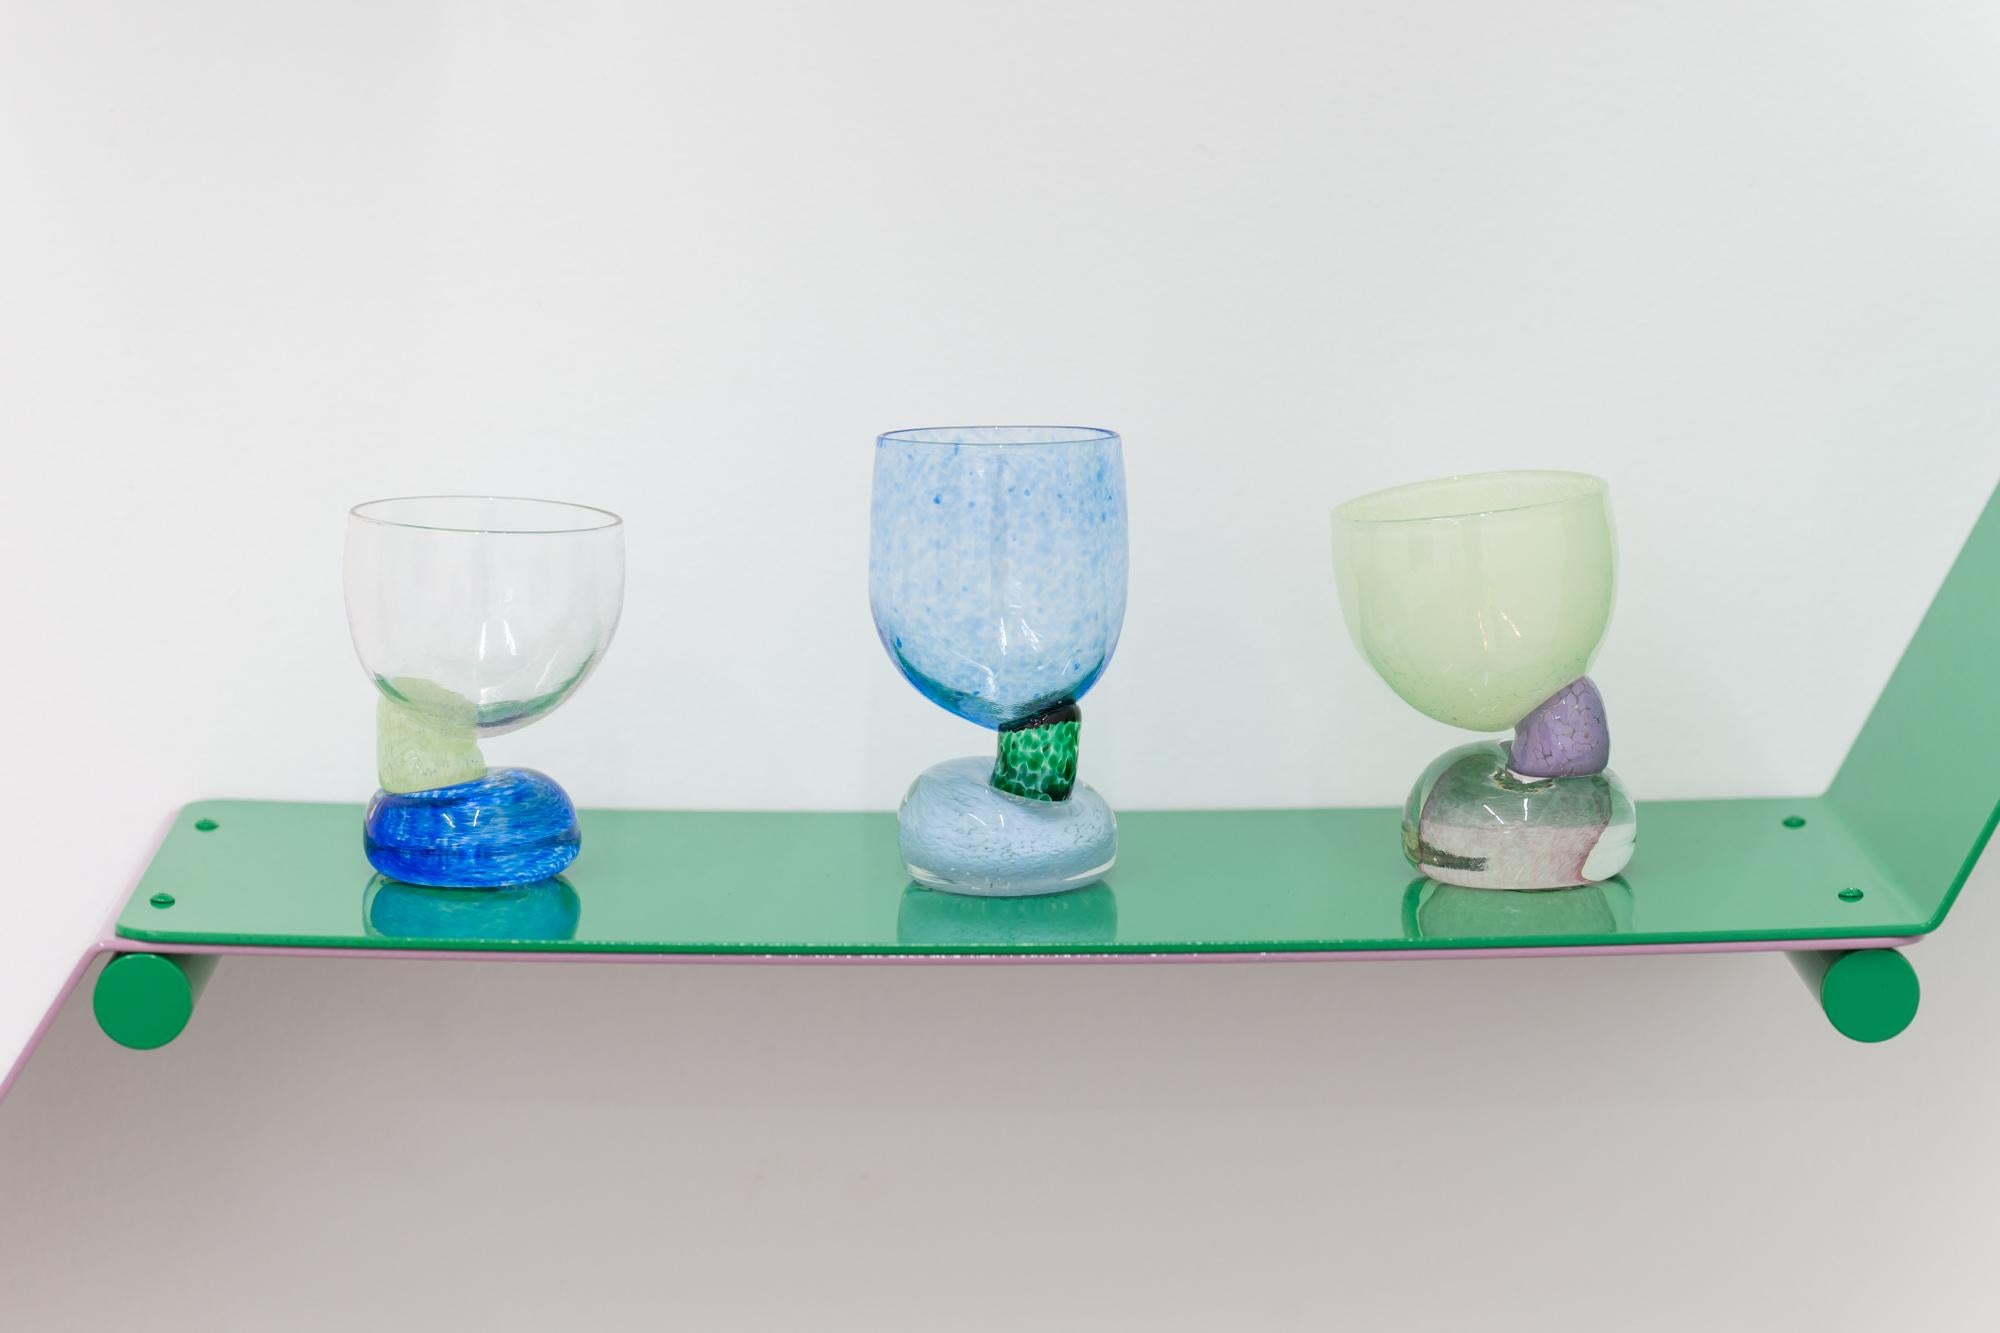 Introducing our new vibrant and playful collection of sculptural drinkware, designed with a profound desire to break free from the monotony of everyday objects. The designer Irina Flore, embraced a therapeutic and spontaneous creative process,